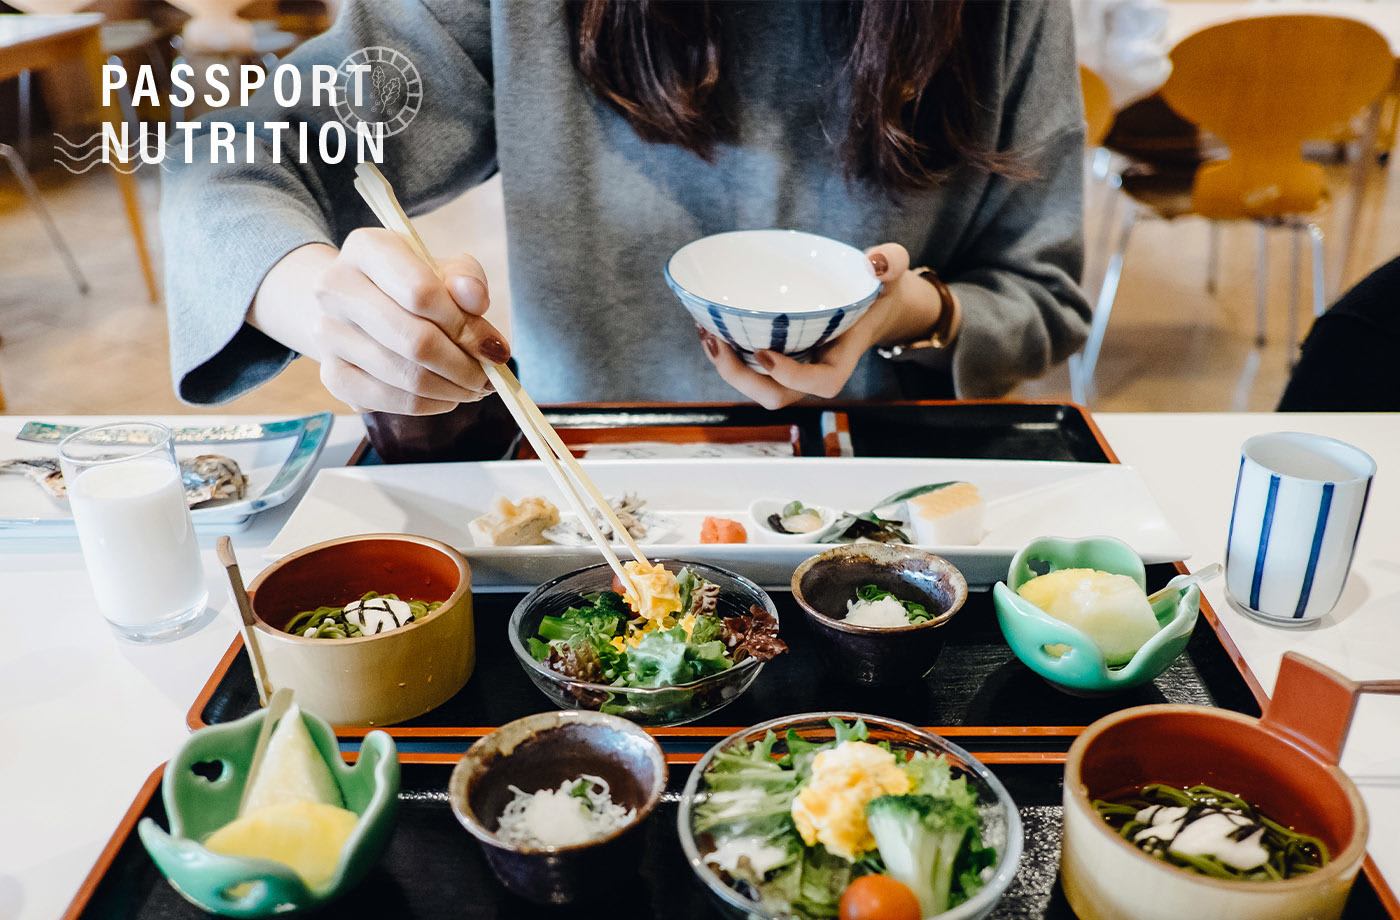 Here's what a healthy plate looks like in 6 different countries